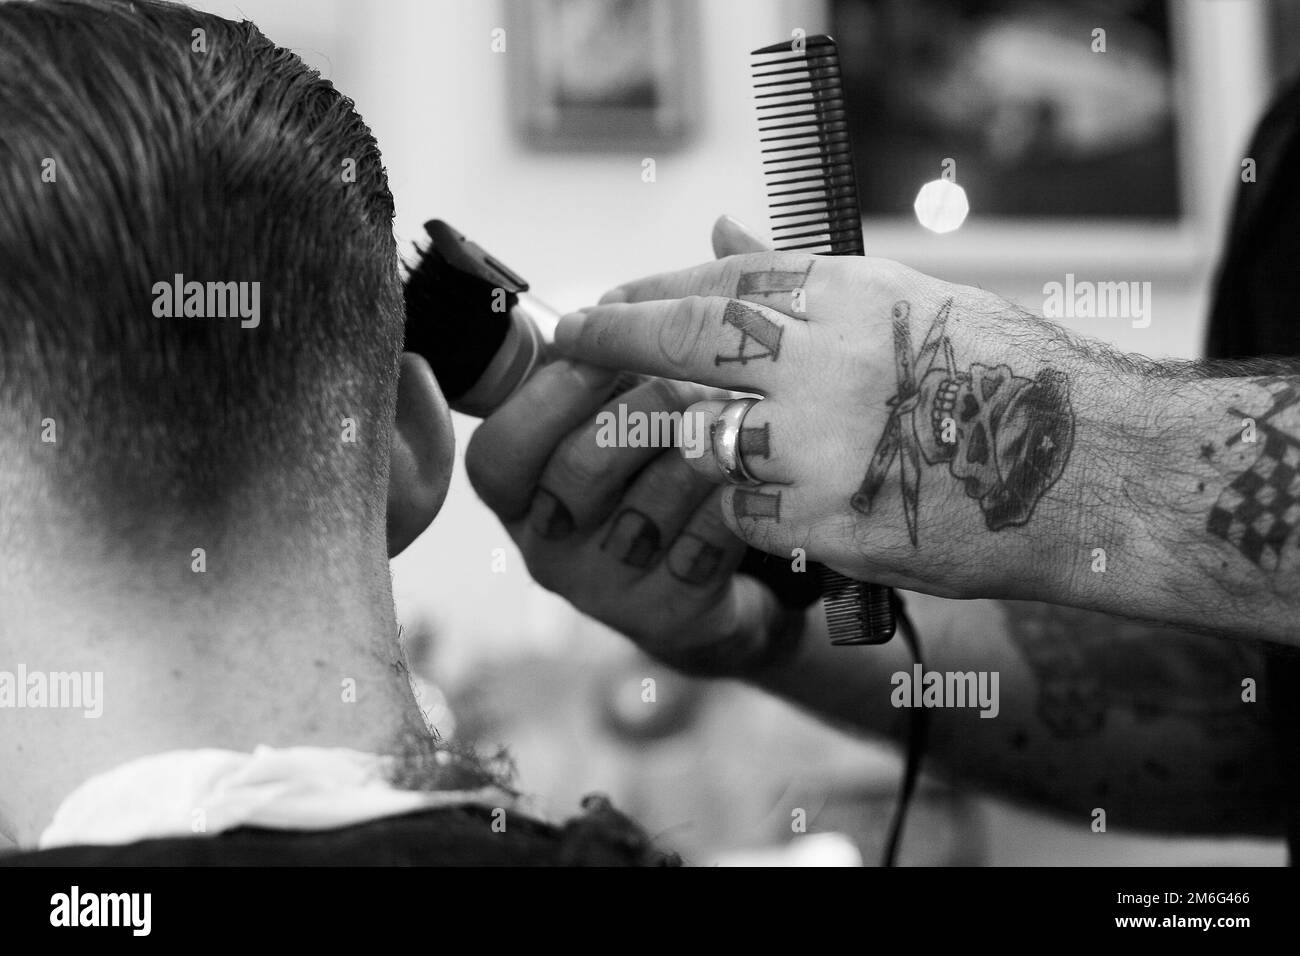 Barber is cutting young man hair. Back view of man getting short hair trimming at barber shop with a clipper machine. Stock Photo